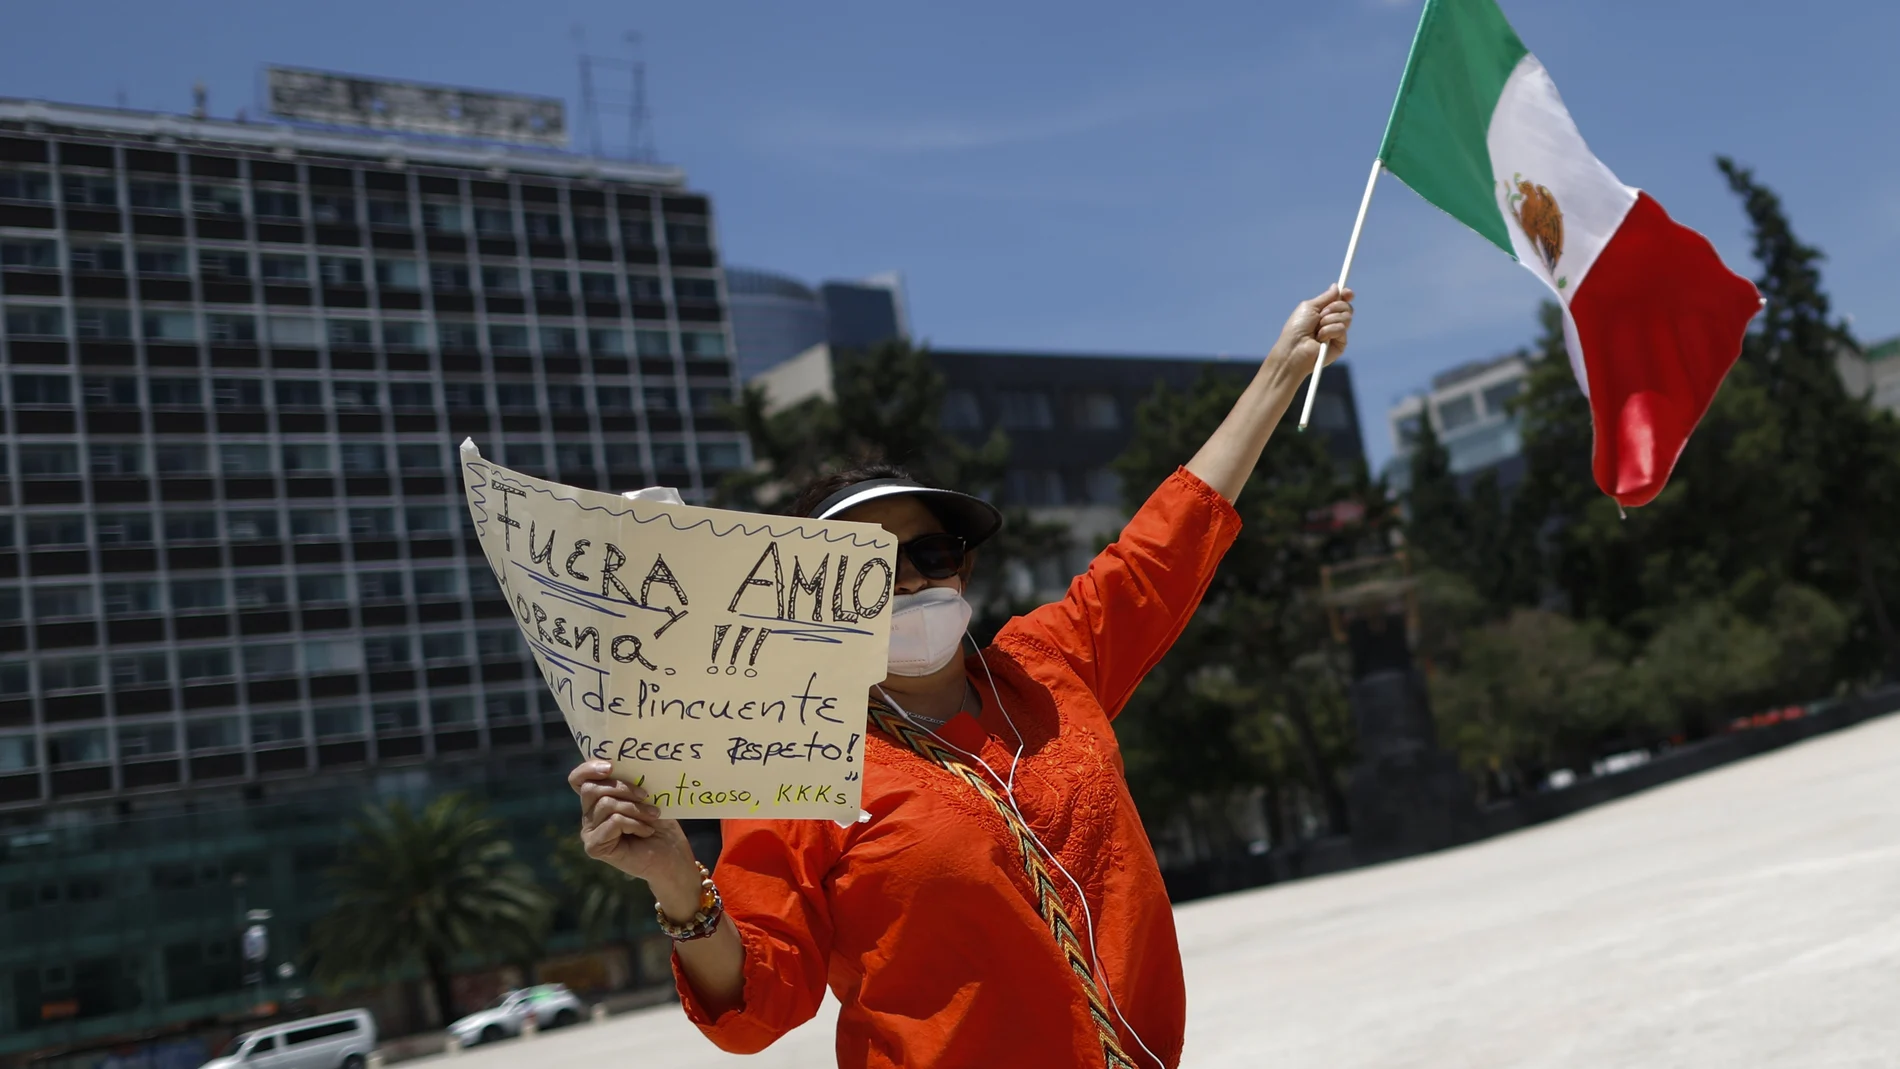 A demonstrator holds up a sign calling for the resignation of President Andres Manuel Lopez Obrador, as she stands along the road during a anti-government driving protest by hundreds of cars, in Mexico City, Sunday, June 28, 2020. (AP Photo/Rebecca Blackwell)